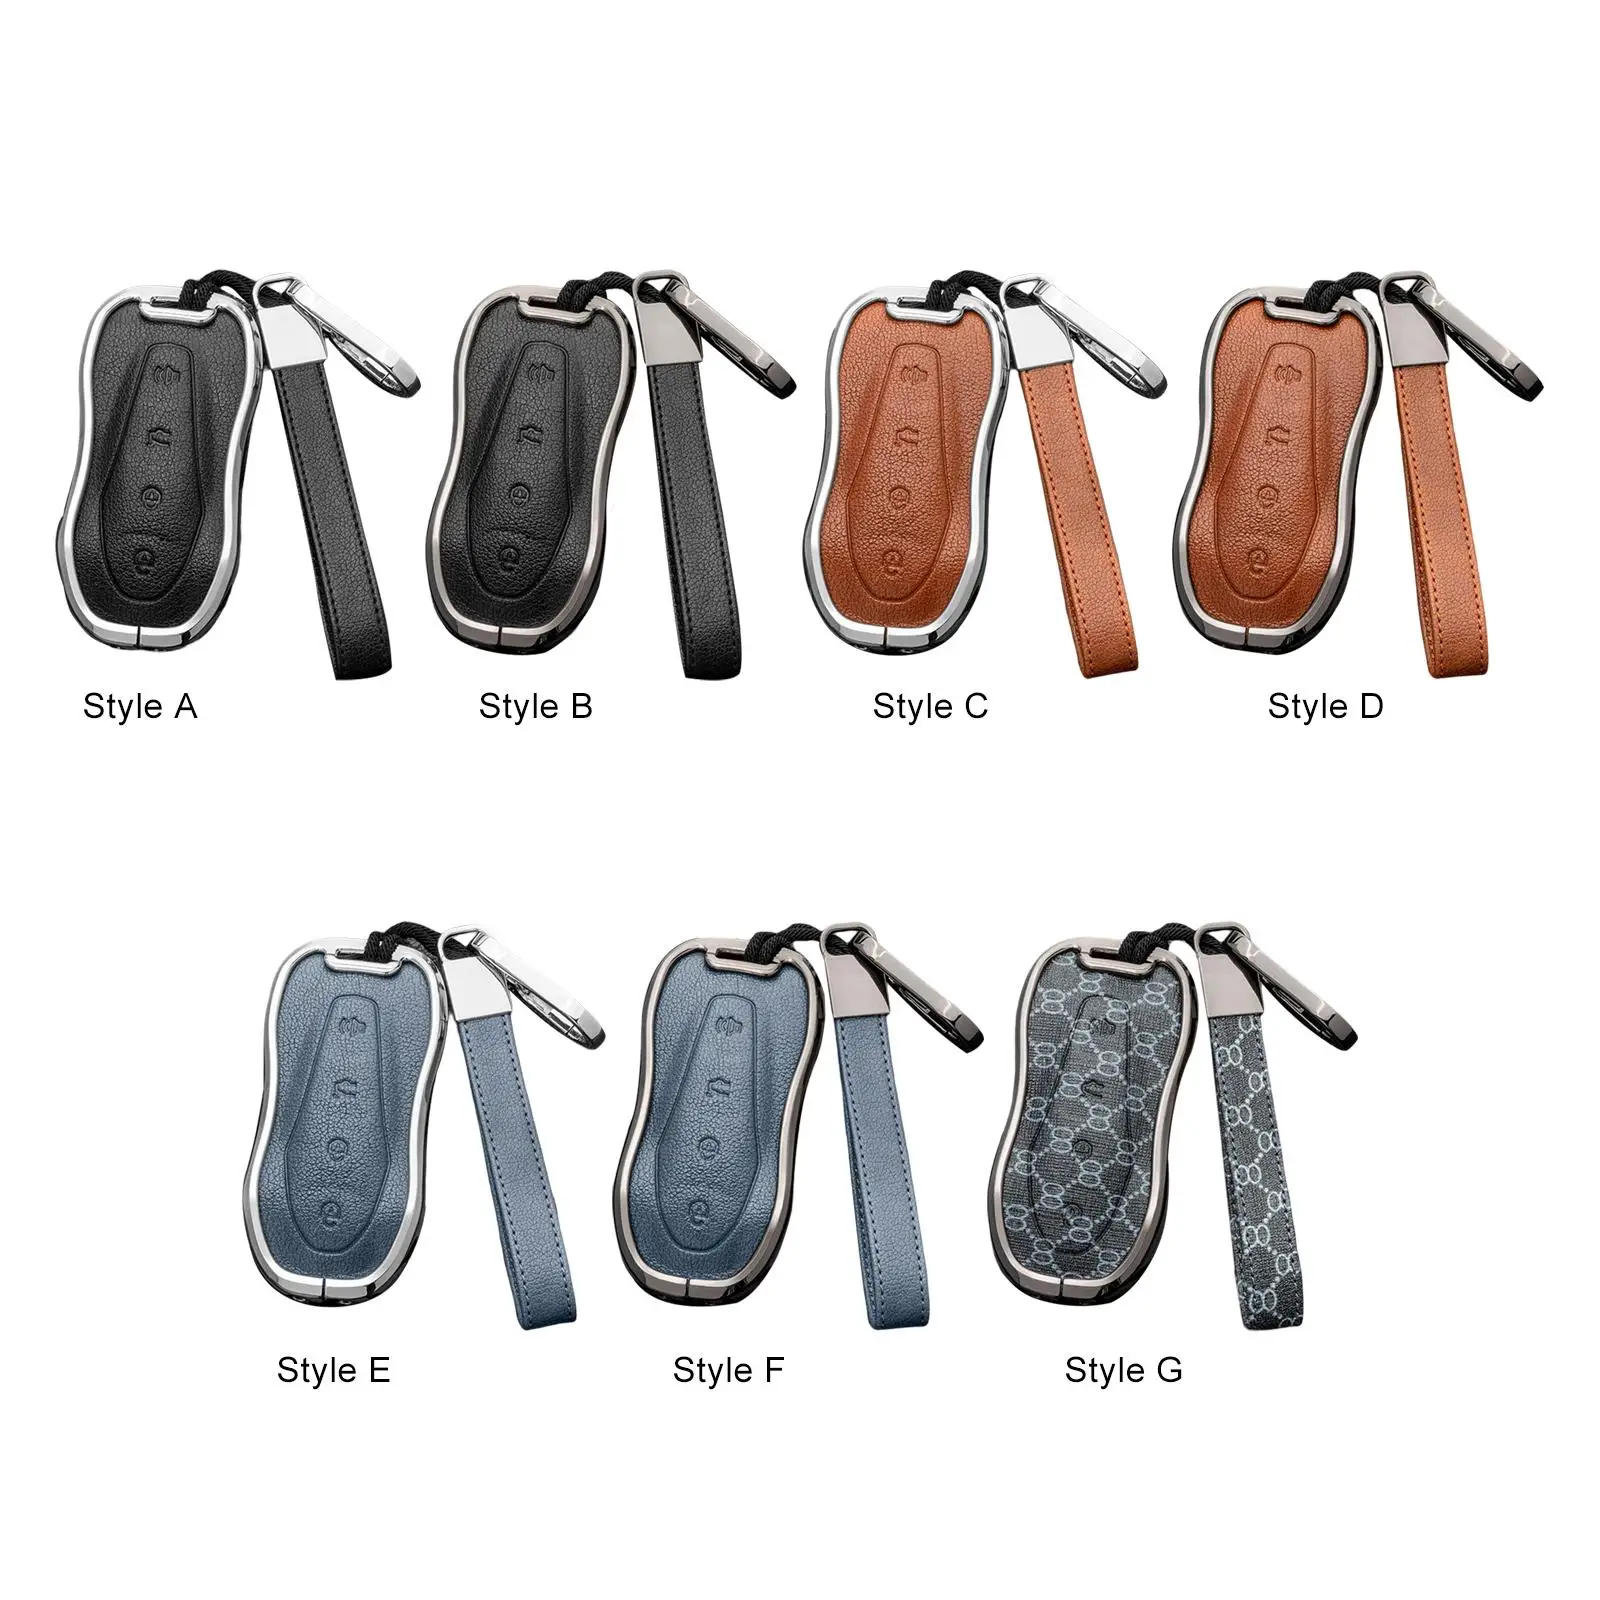 Durable Key Fob Cover Case Key Protective with Keychain Housing Full Protection Dustproof Automotive Waterproof for Geely